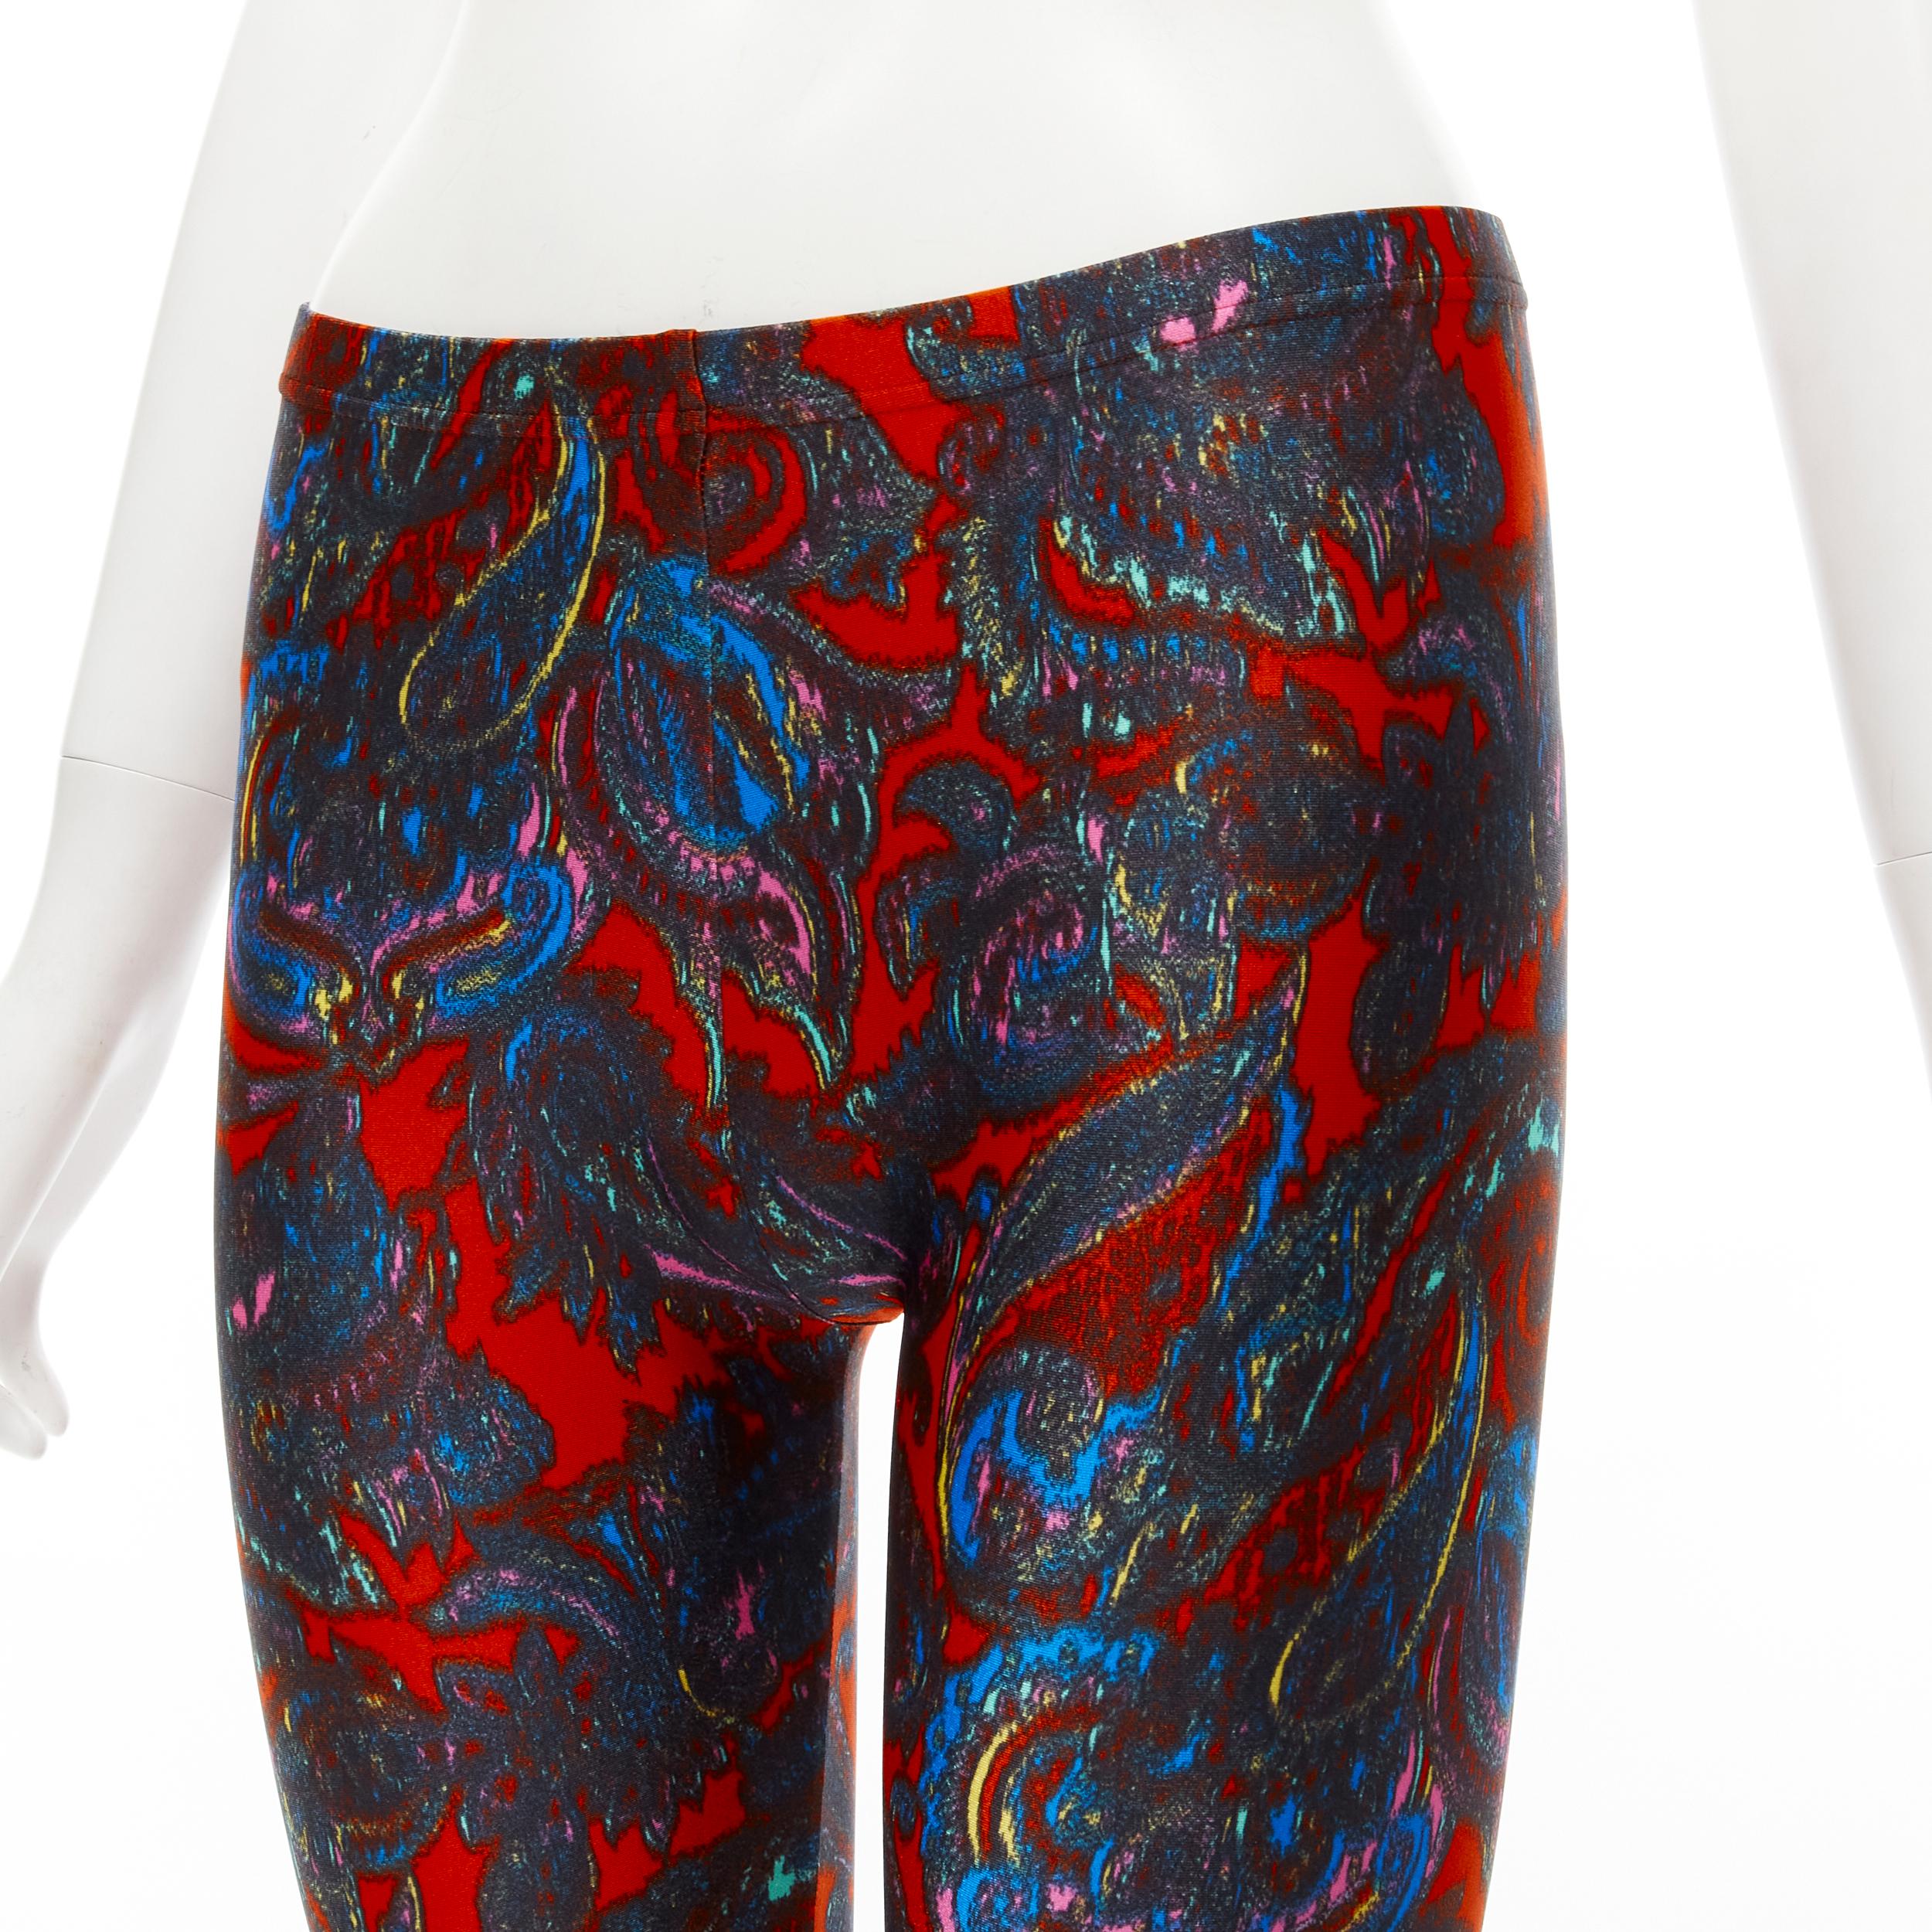 LOUIS VUITTON 2009 Runway red blue paisley print stretchy legging FR34 XS rare 
Reference: ANWU/A00559 
Brand: Louis Vuitton 
Designer: Marc Jacobs 
Collection: Fall Winter 2009 Runway 
Material: Feels like polyester 
Color: Red 
Pattern: Paisley